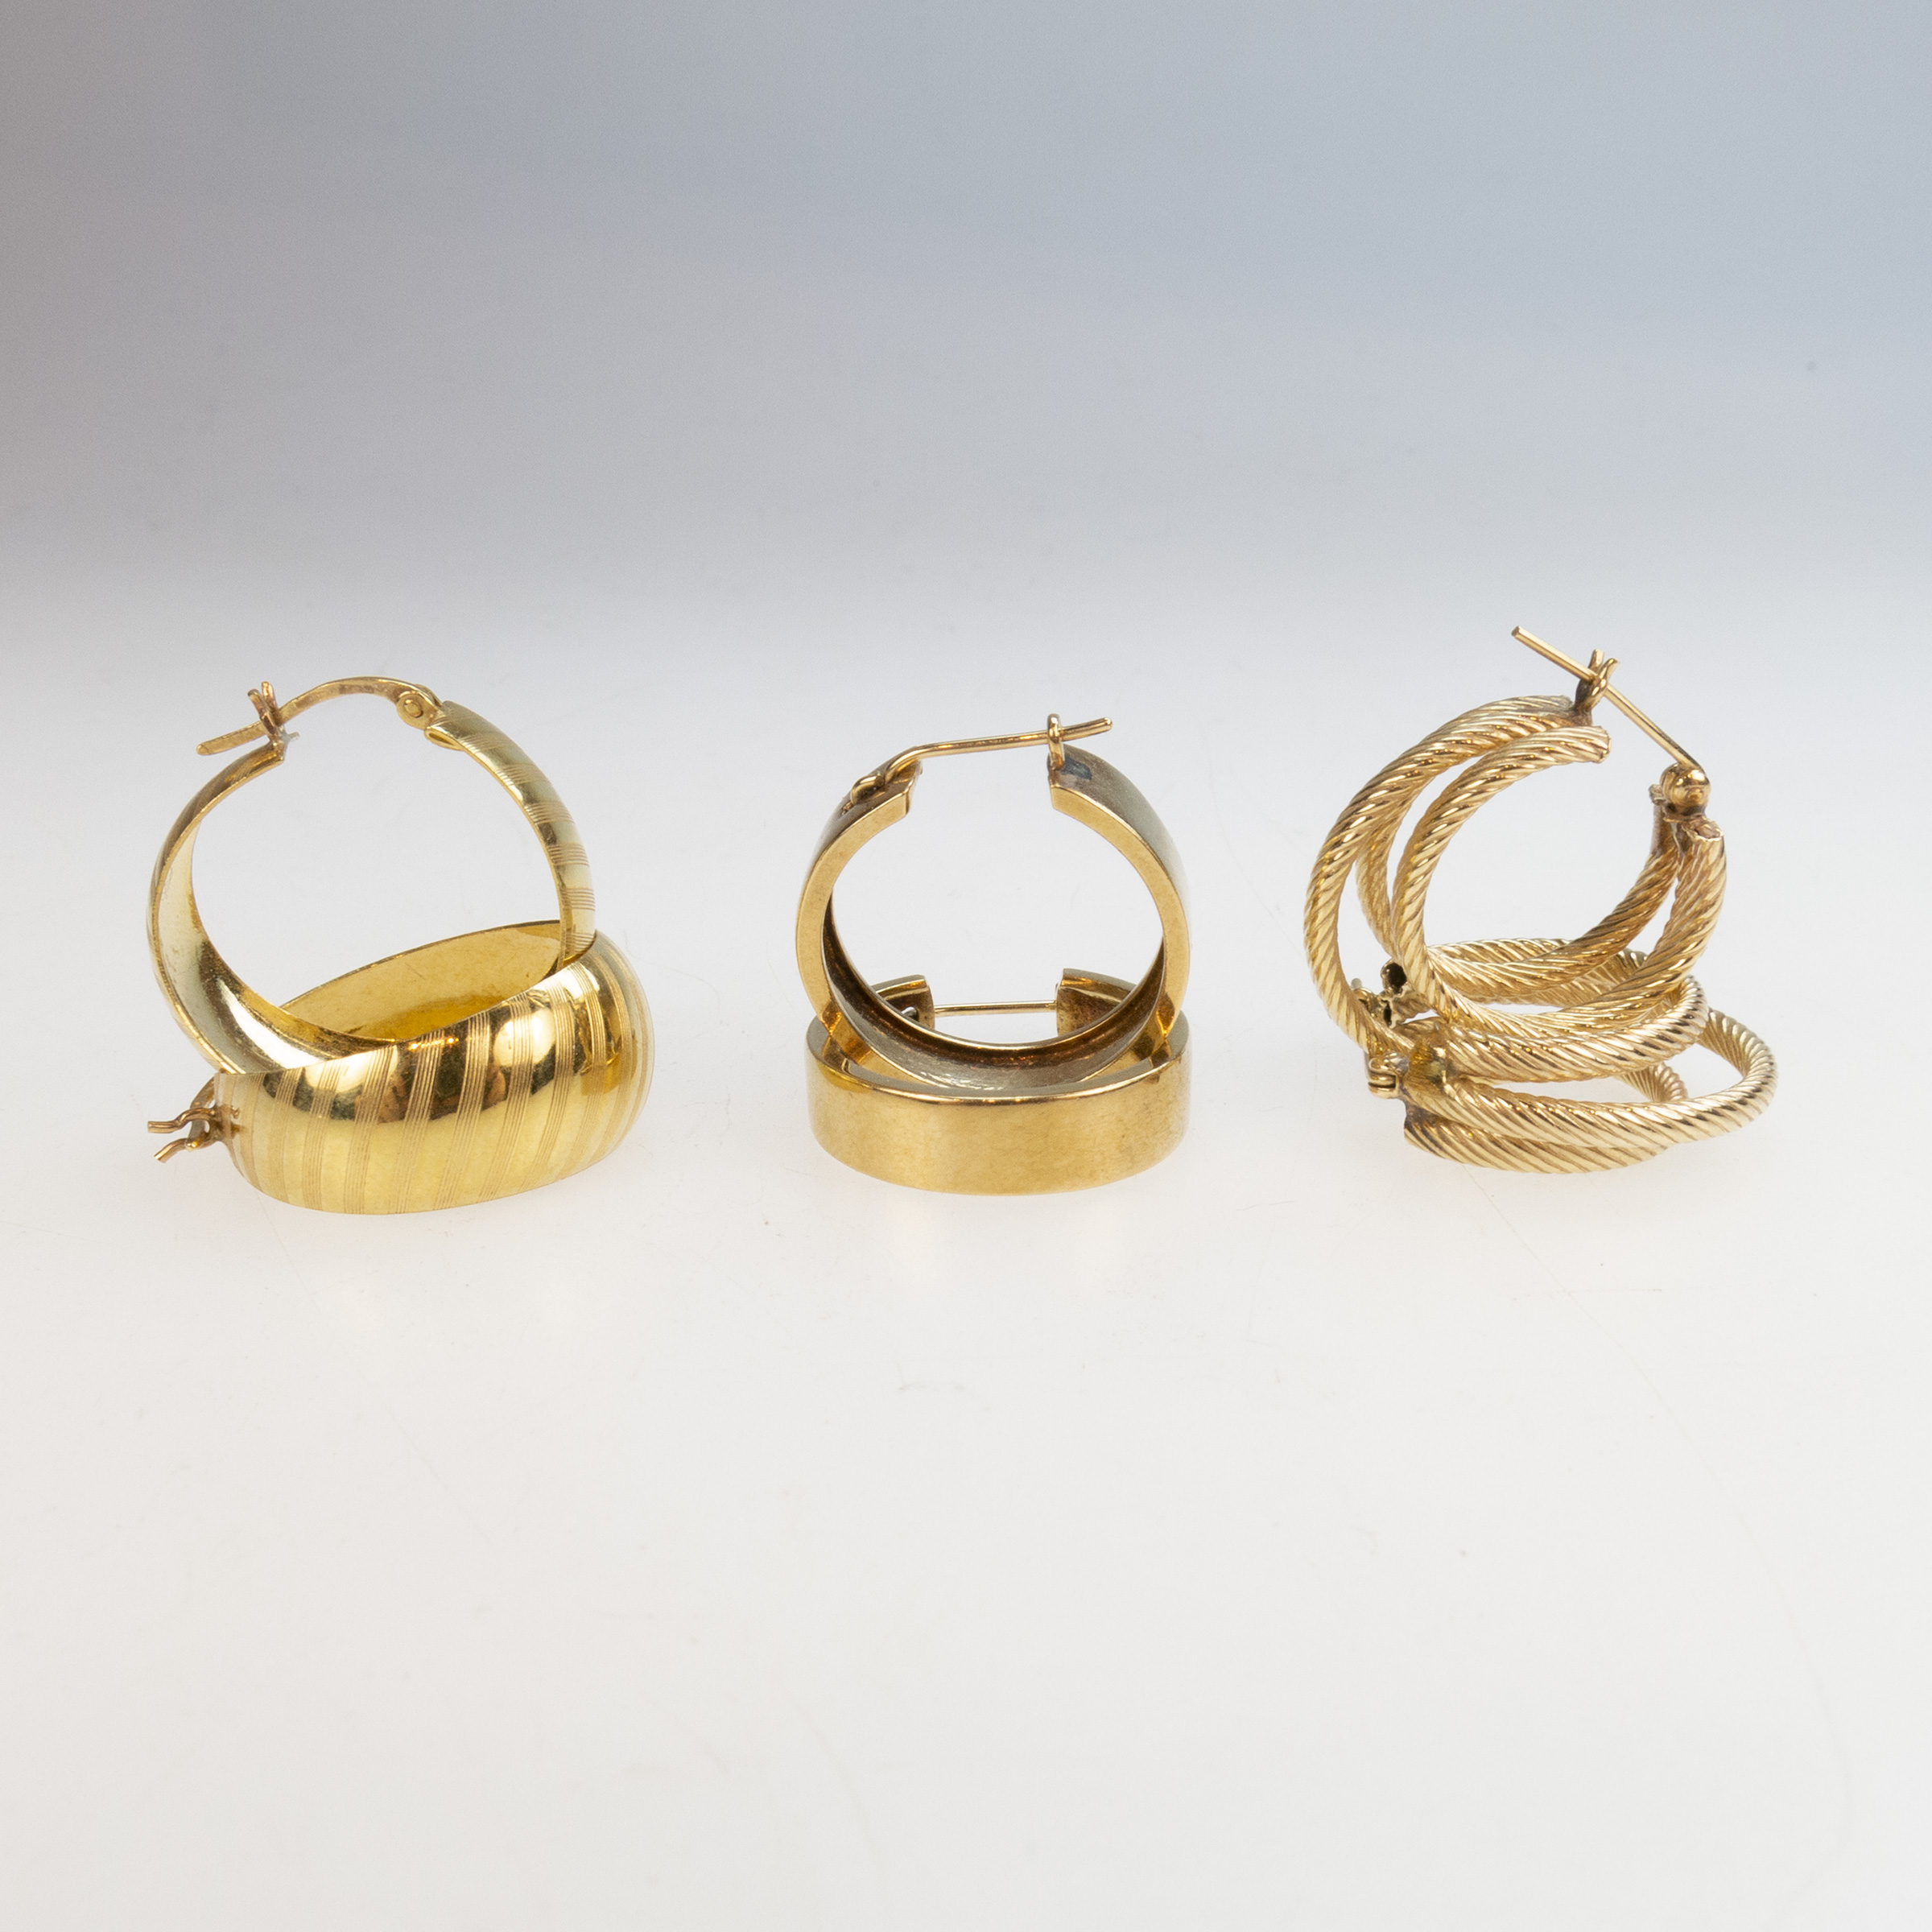 1 x 10k, 1 x 14k and 1 x 18k Pairs Of Yellow Gold Hoop Earrings